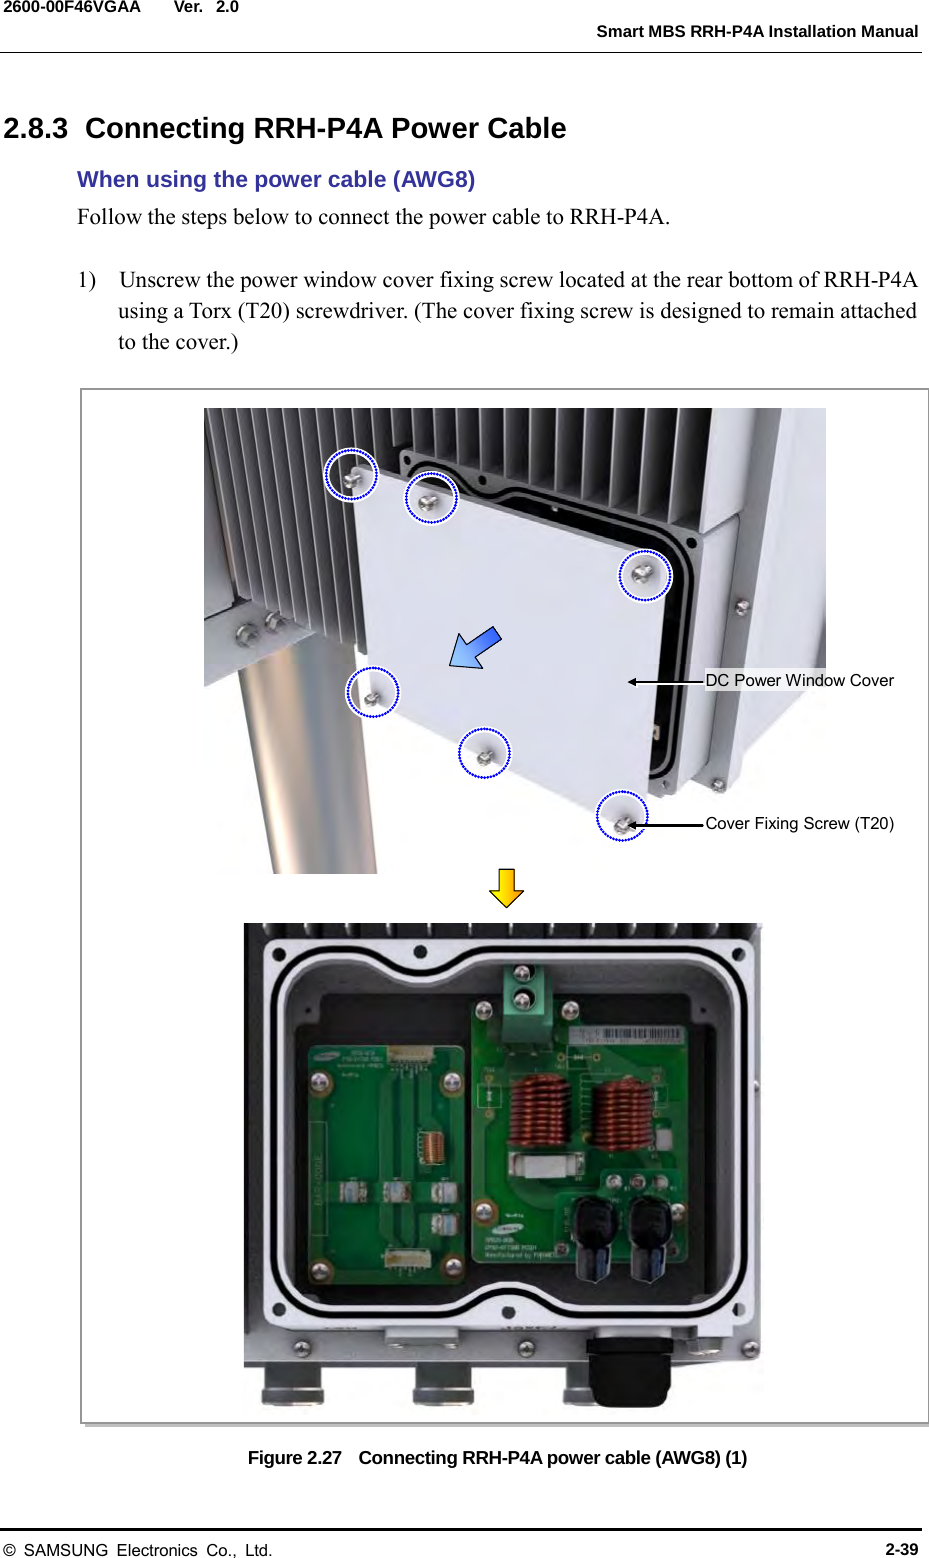  Ver.   Smart MBS RRH-P4A Installation Manual 2600-00F46VGAA 2.0 2.8.3  Connecting RRH-P4A Power Cable When using the power cable (AWG8) Follow the steps below to connect the power cable to RRH-P4A.  1)  Unscrew the power window cover fixing screw located at the rear bottom of RRH-P4A using a Torx (T20) screwdriver. (The cover fixing screw is designed to remain attached to the cover.)  Figure 2.27  Connecting RRH-P4A power cable (AWG8) (1) Cover Fixing Screw (T20) DC Power Window Cover © SAMSUNG Electronics Co., Ltd. 2-39 